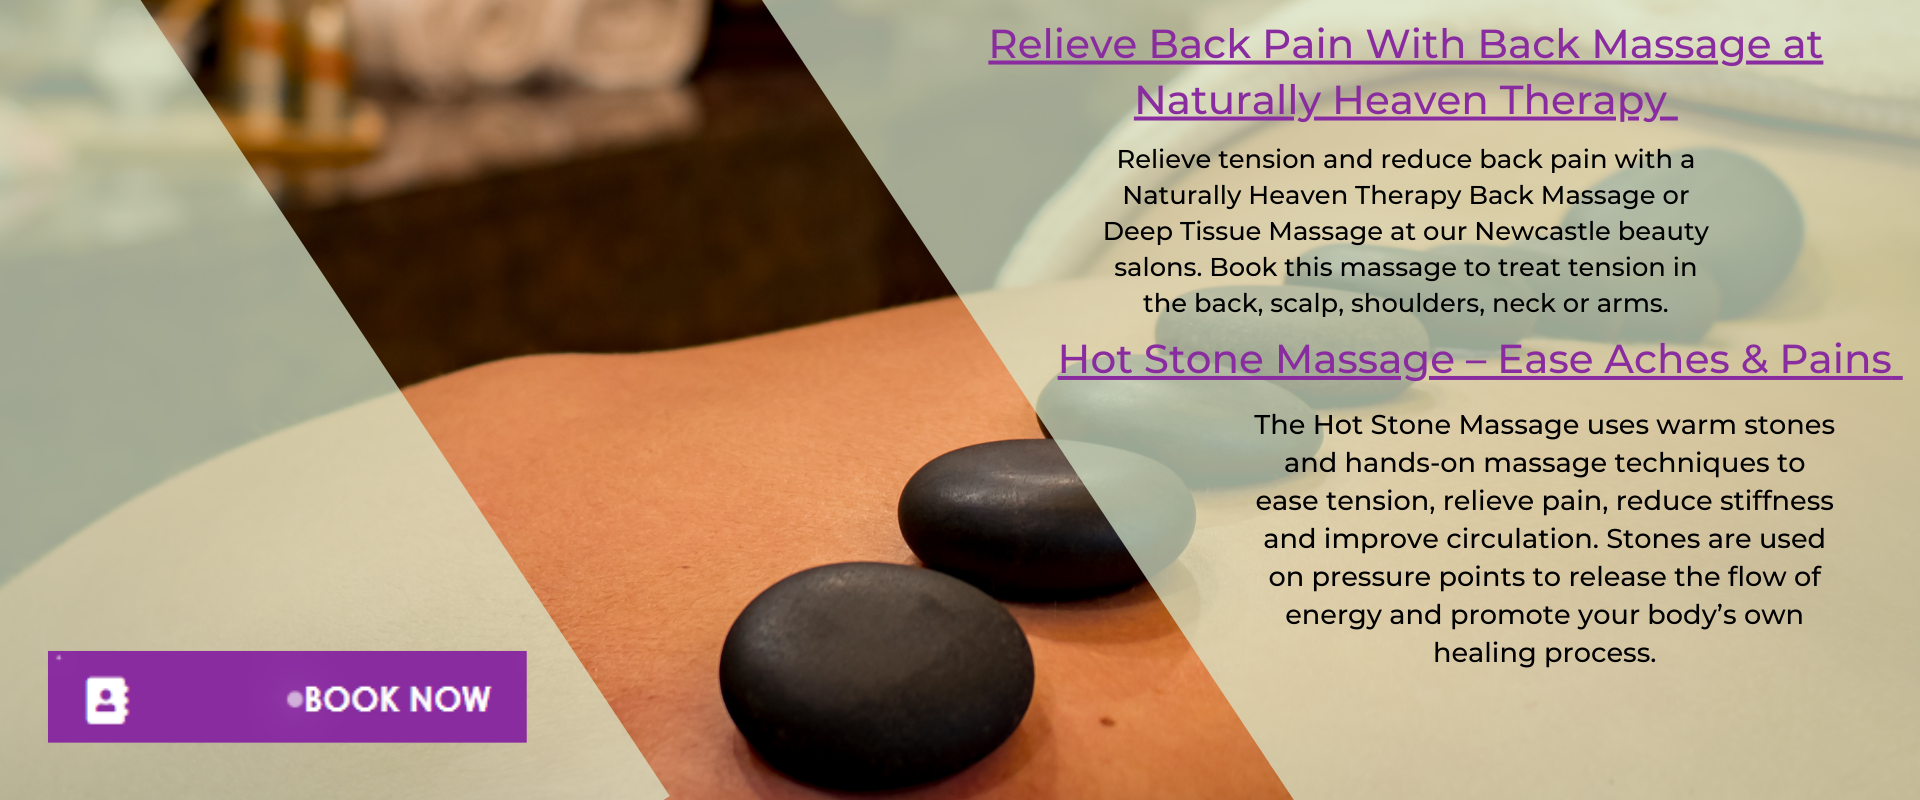 Book Massage & Body Treatments to help ease back pain in Newcastle Upon Tyne